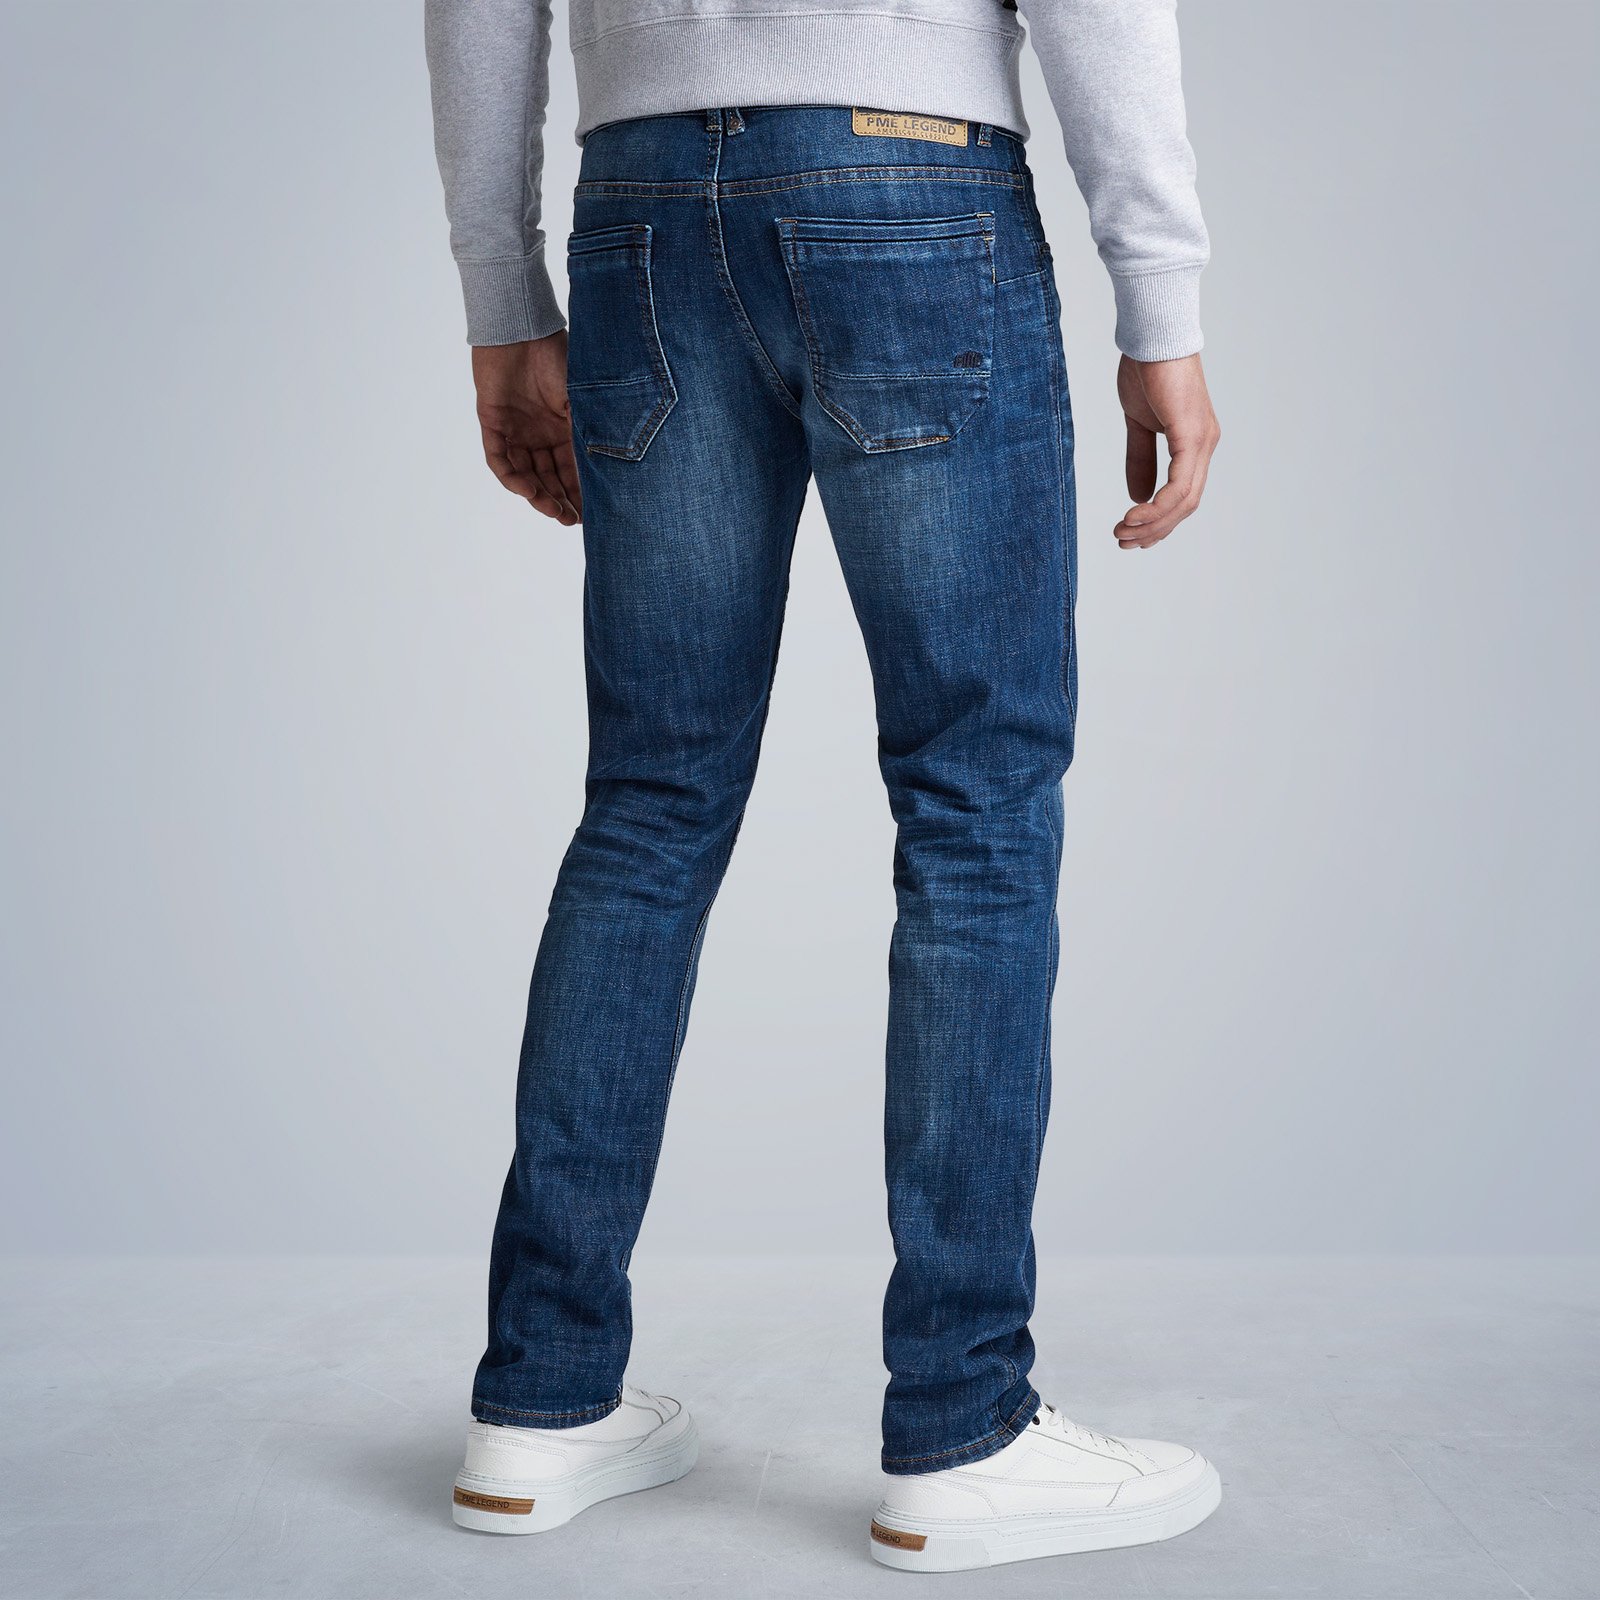 PME JEANS | PME Legend Nightflight jeans | Free delivery